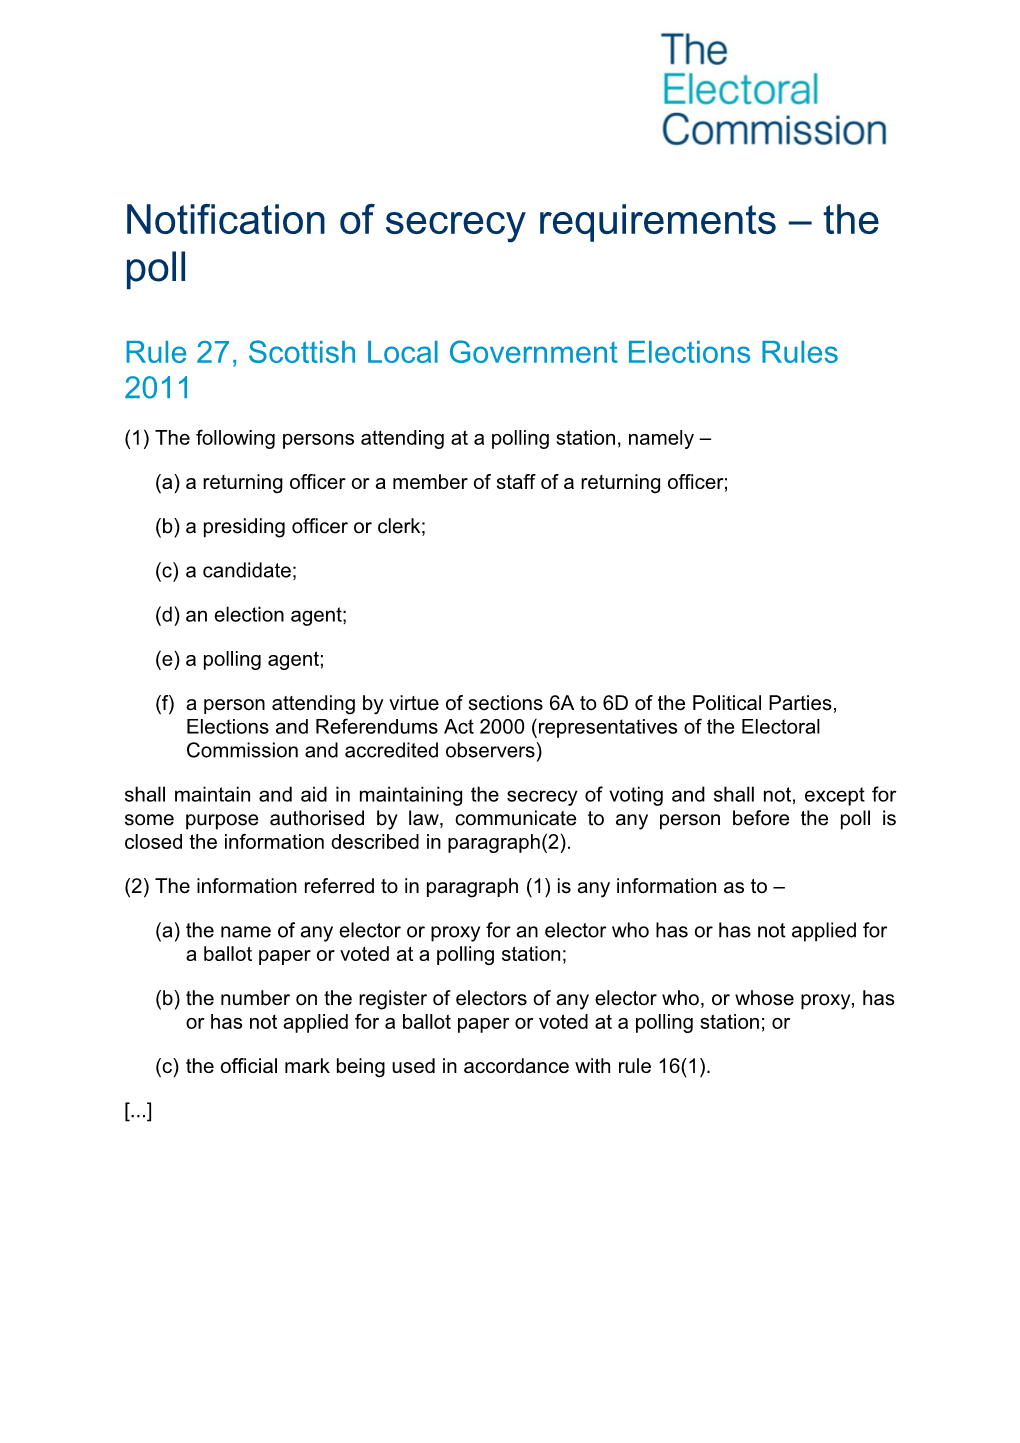 SLG Secrecy Requirements the Poll